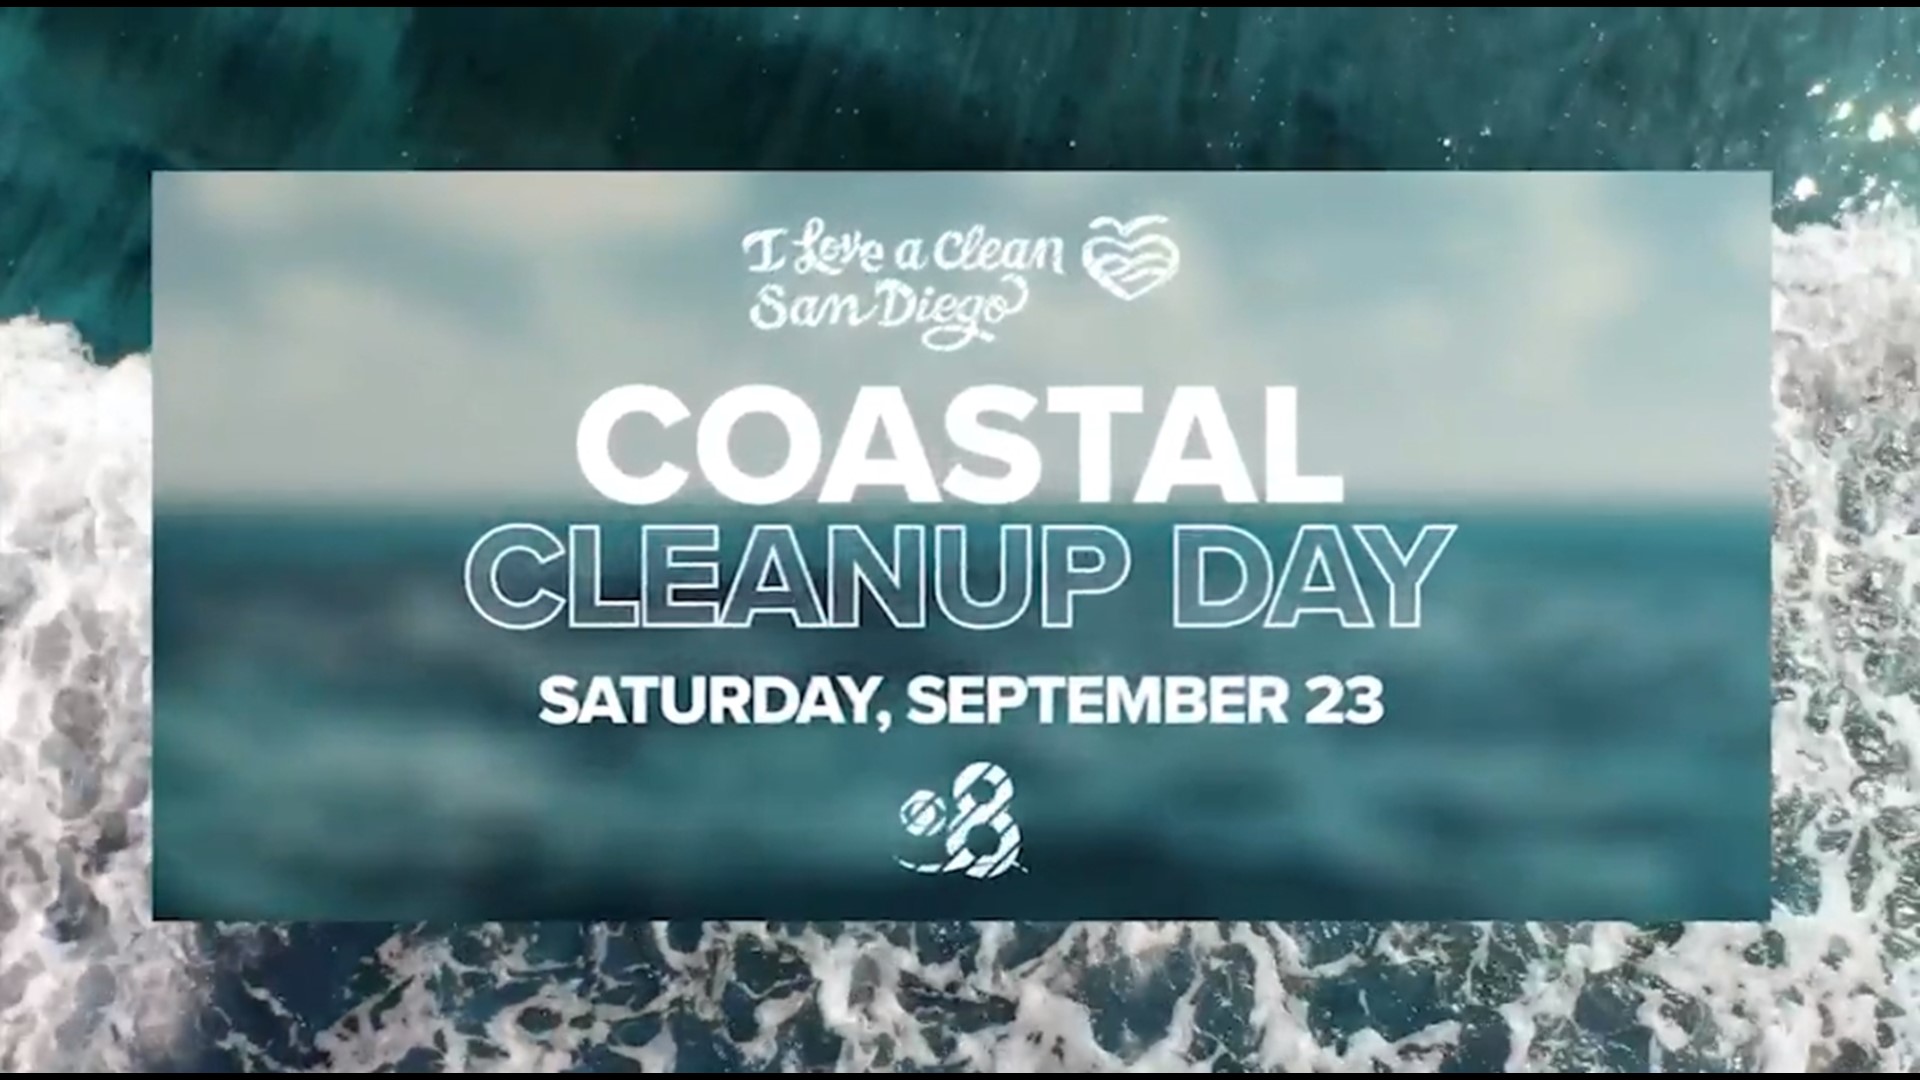 CBS 8 is teaming up with I Love a Clean San Diego for the county’s largest, single-day cleanup effort.